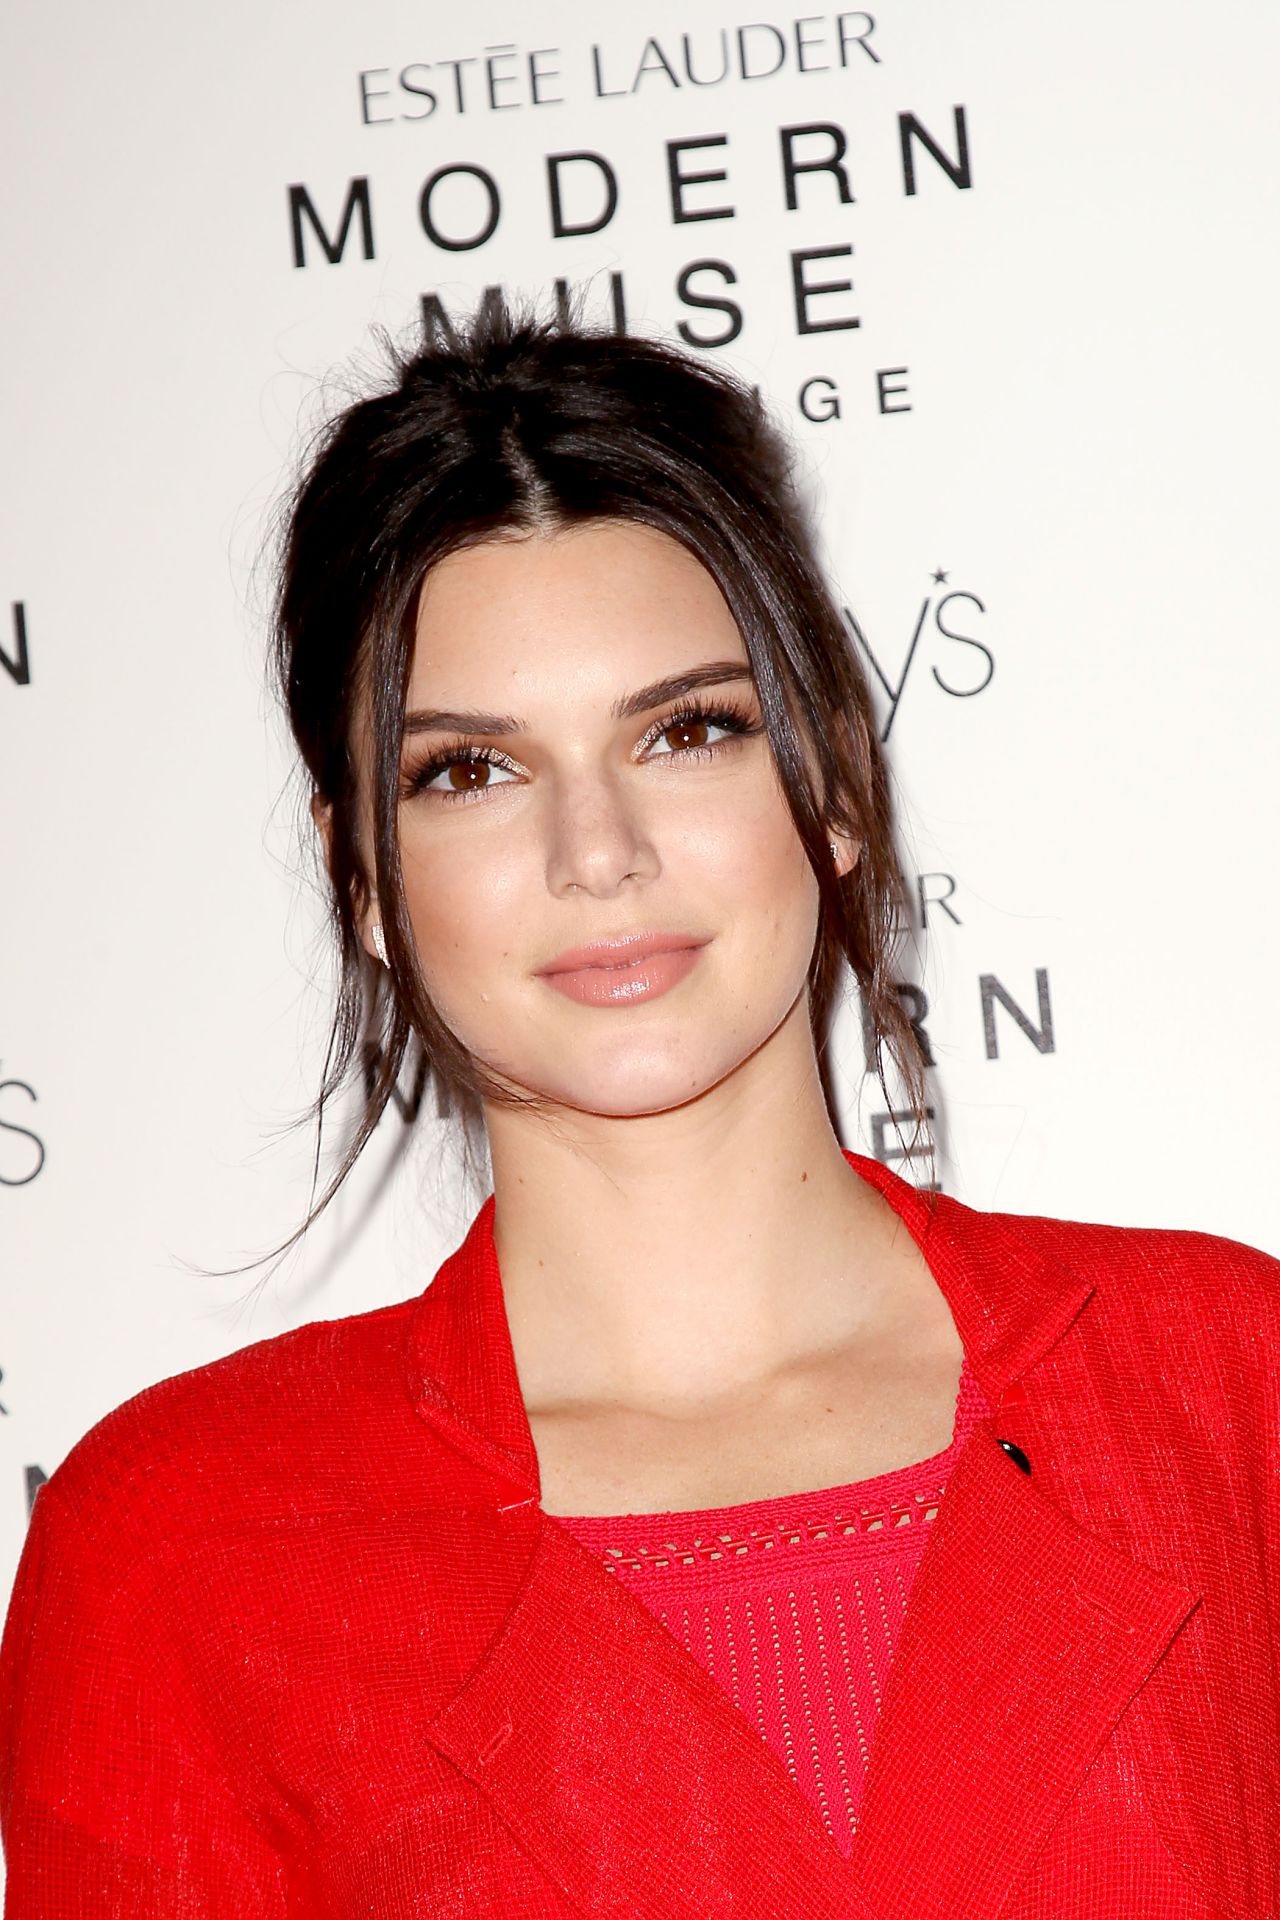 Kendall Jenner - Modern Muse Le Rouge Perfume Launch in New York City ...